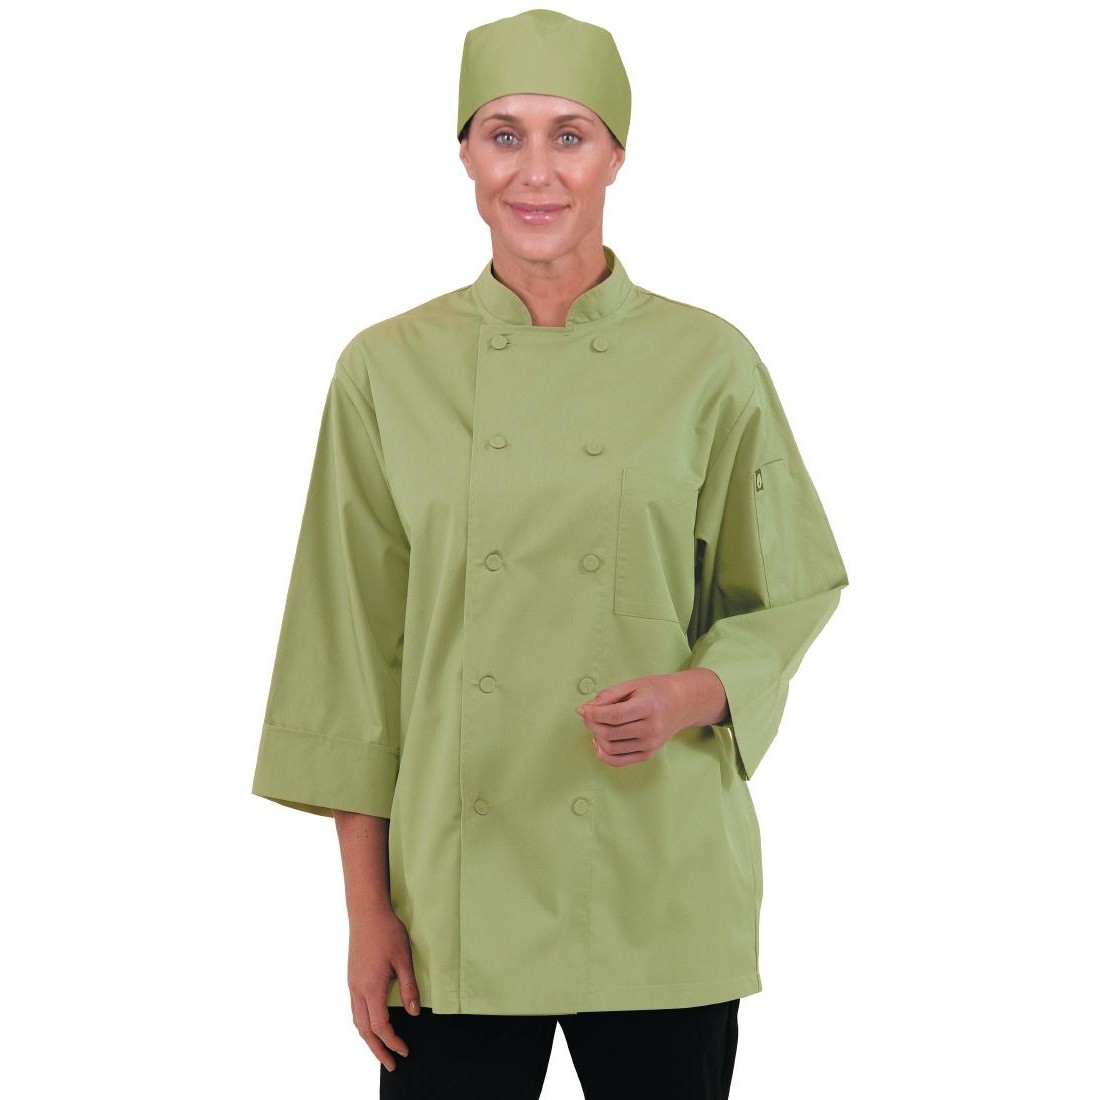 Colour by Chef Works Unisex Chefs Jacket Lime